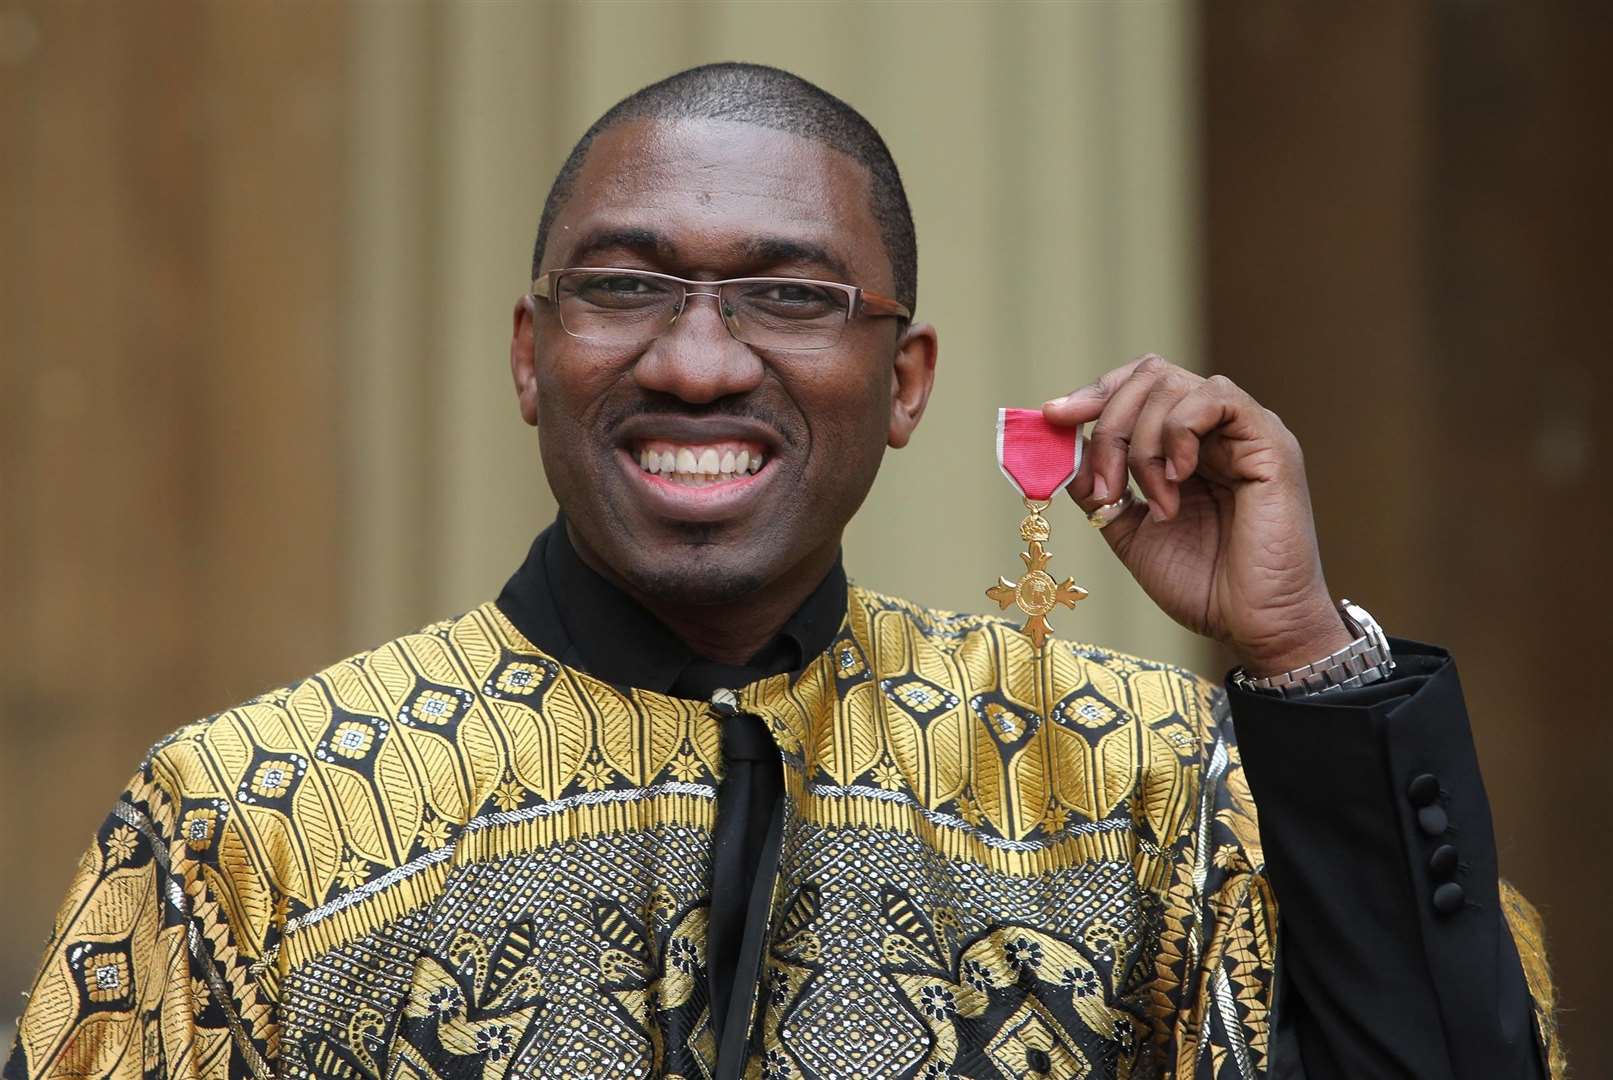 Kwame Kwei-Armah was made an OBE for services to drama in 2012 (Sean Dempsey/PA)